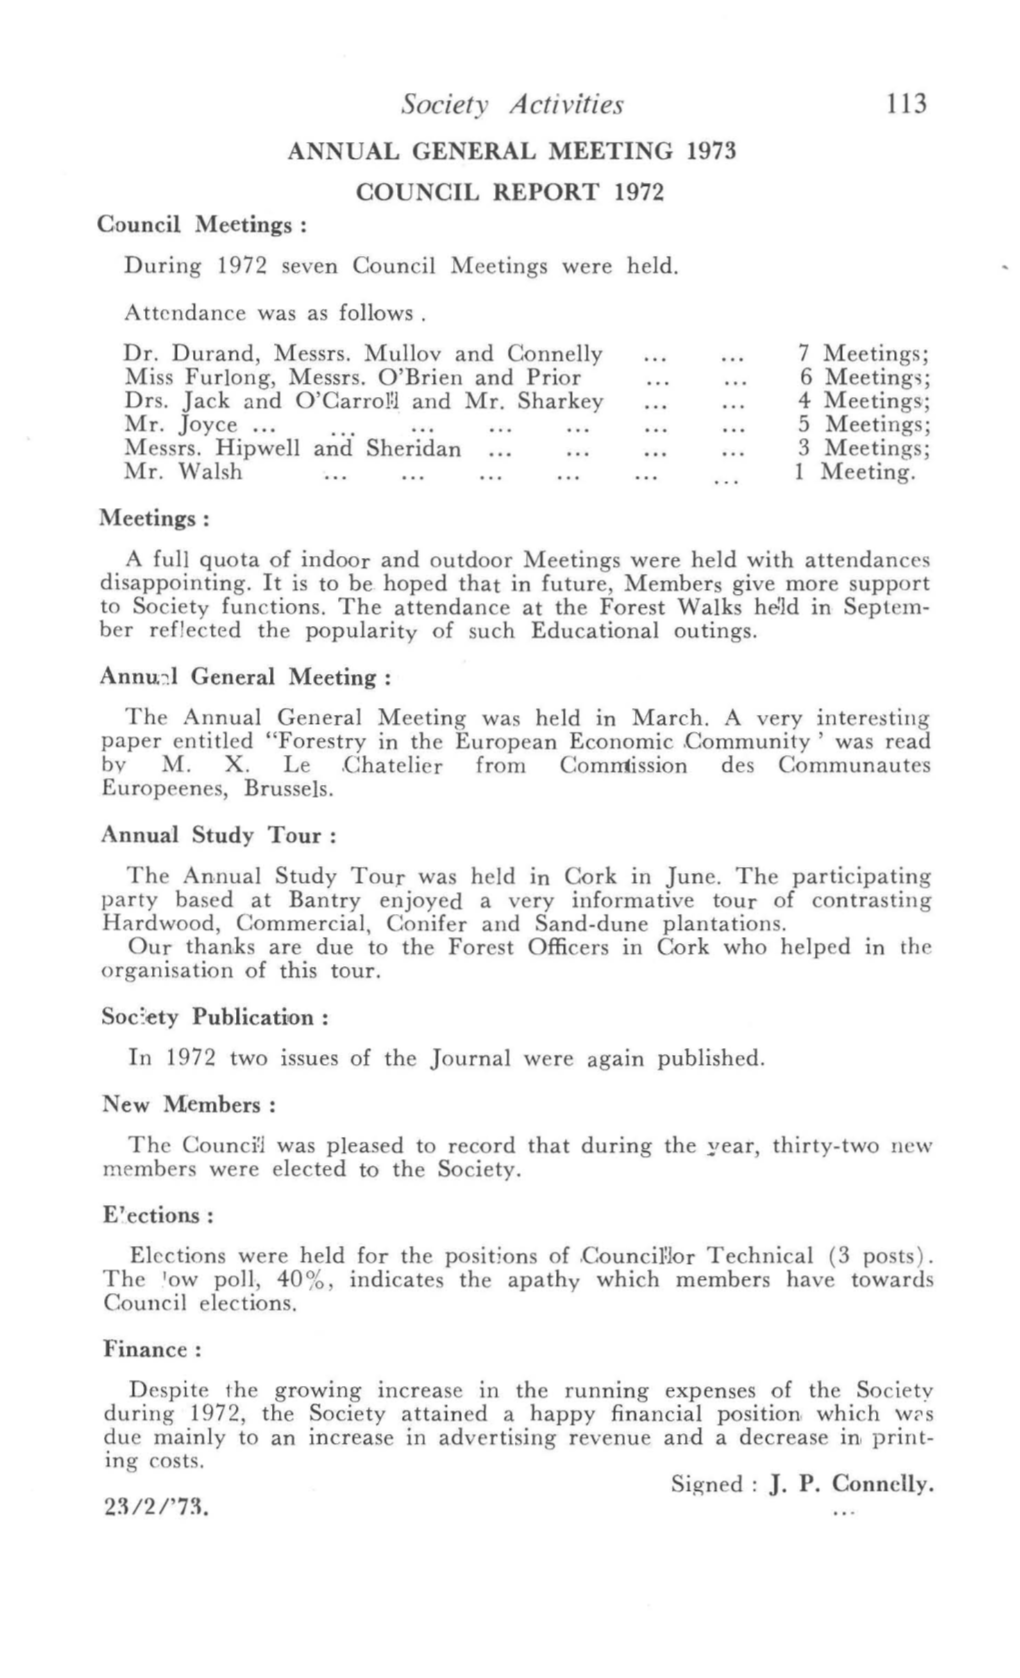 Society Activities 113 ANNUAL GENERAL MEETING 1973 COUNCIL REPORT 1972 Council Meetings: During 1972 Seven Council Meetings Were Held